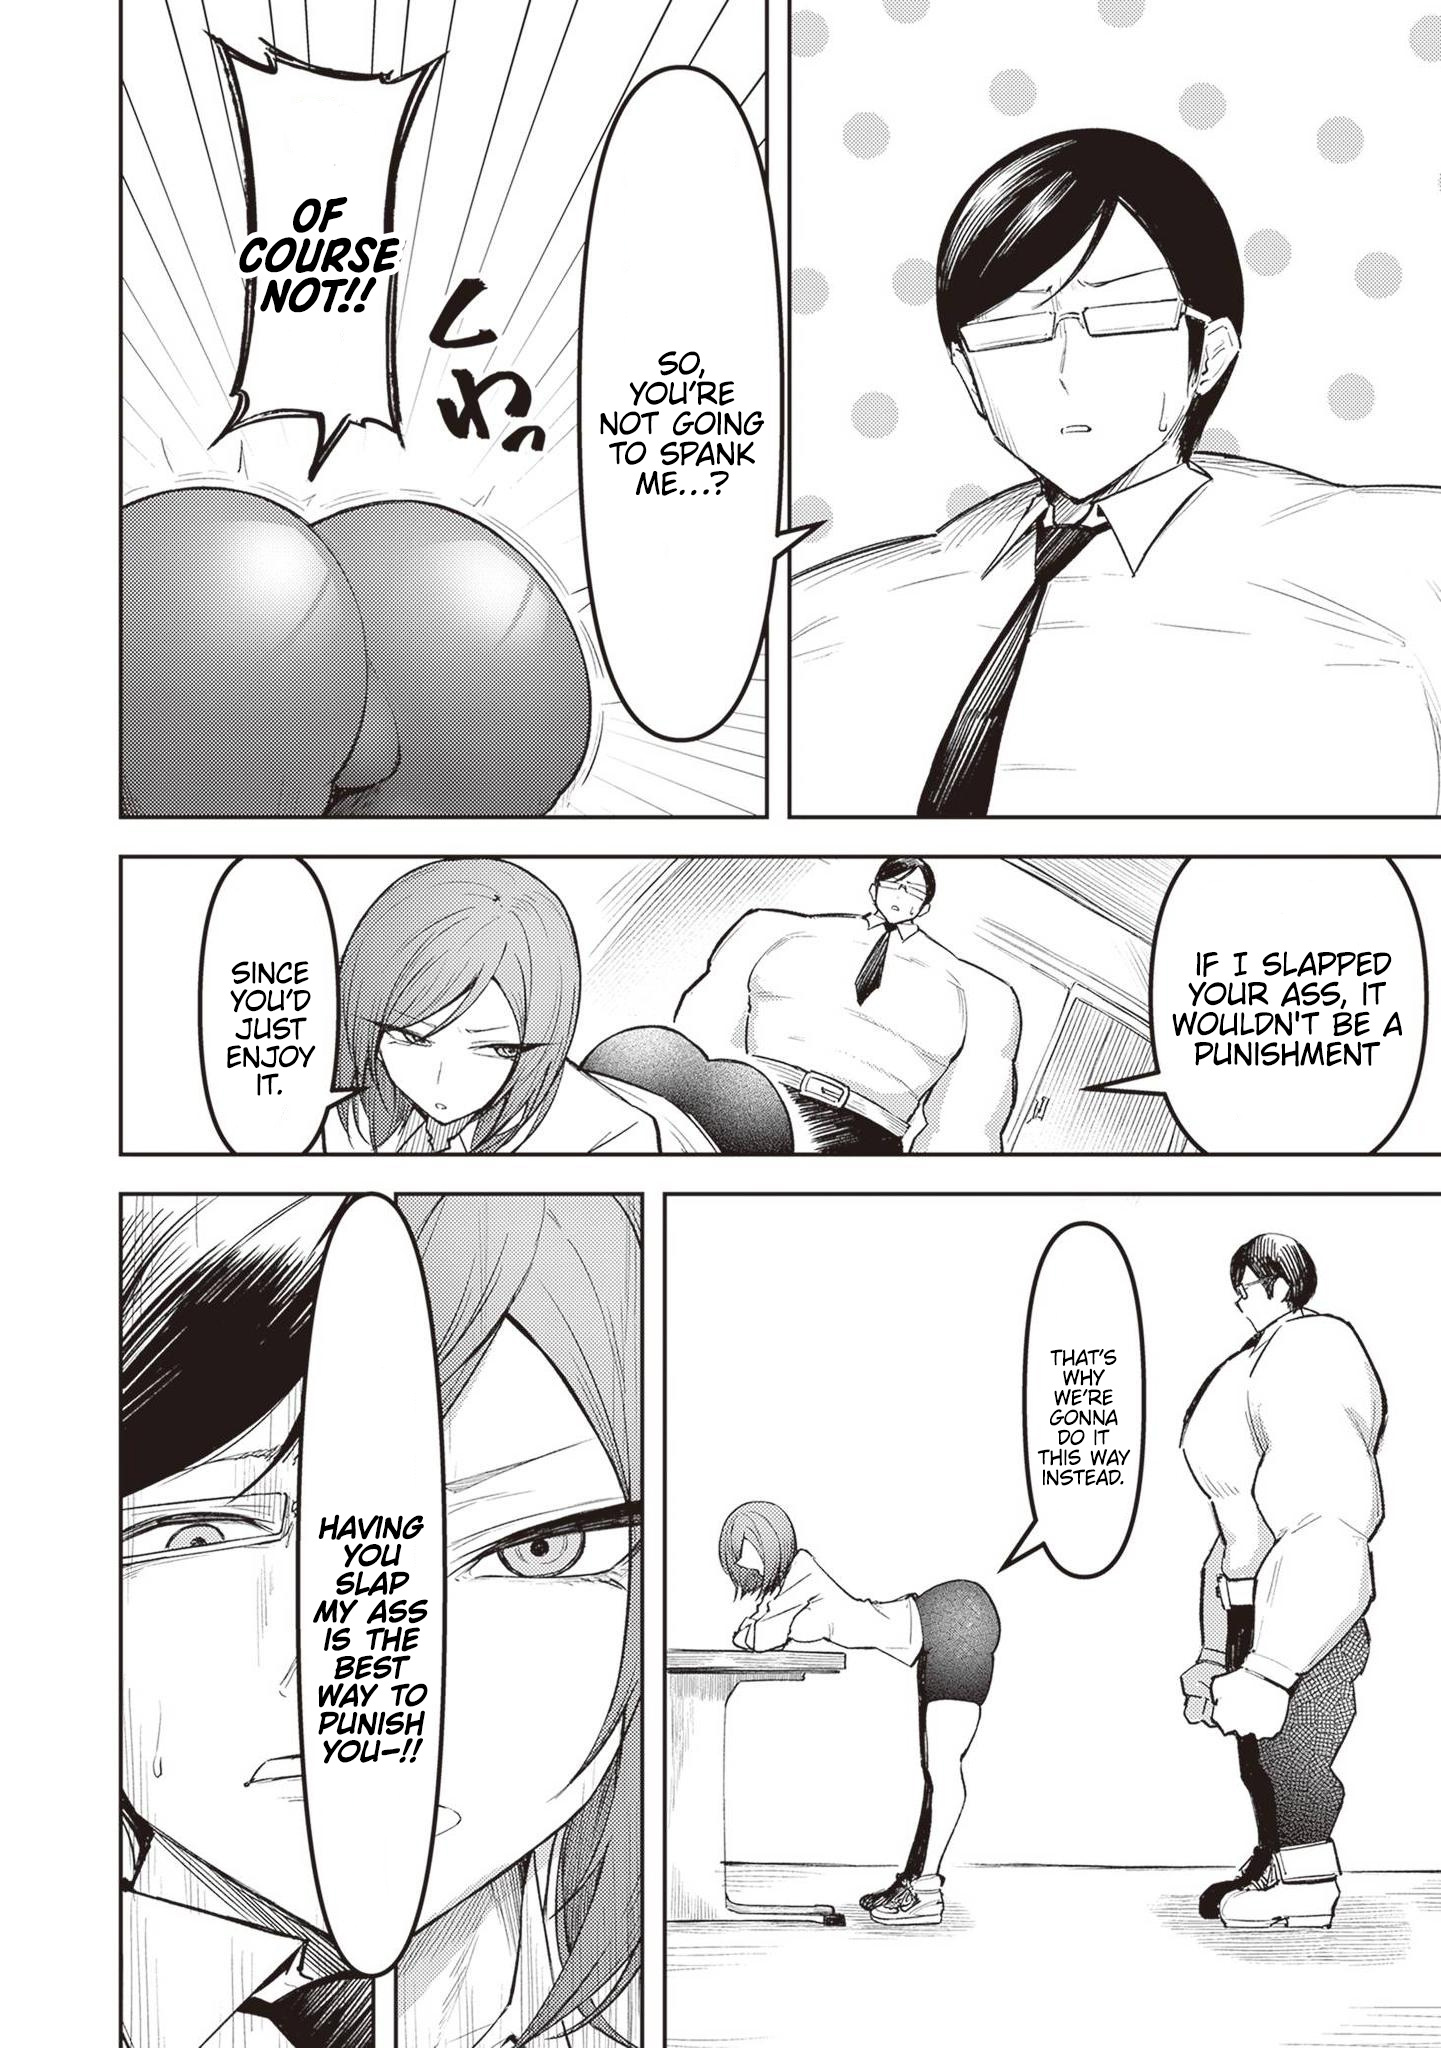 The Devil Fascinates Me In Heavenly Prison Vol.2 Chapter 8: Spanking - Picture 2